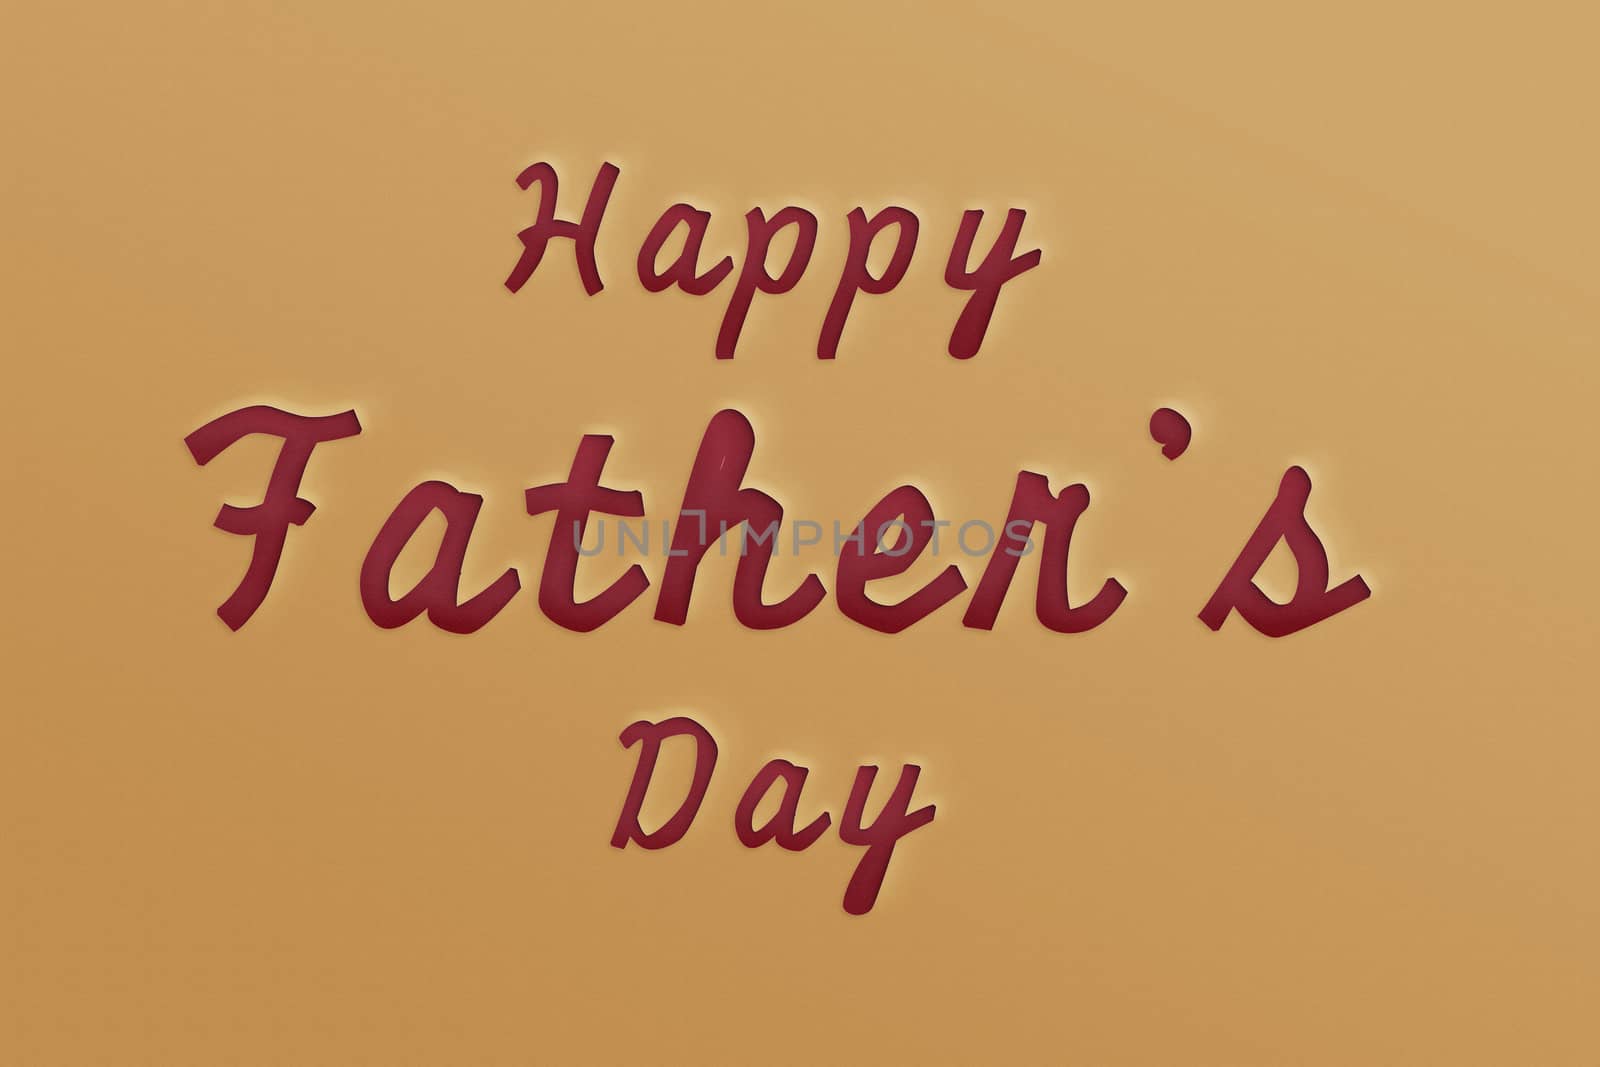 Happy fathers day creative background concept: cut out word happy fathers day text on brown paper effect for fathers day event , retro style